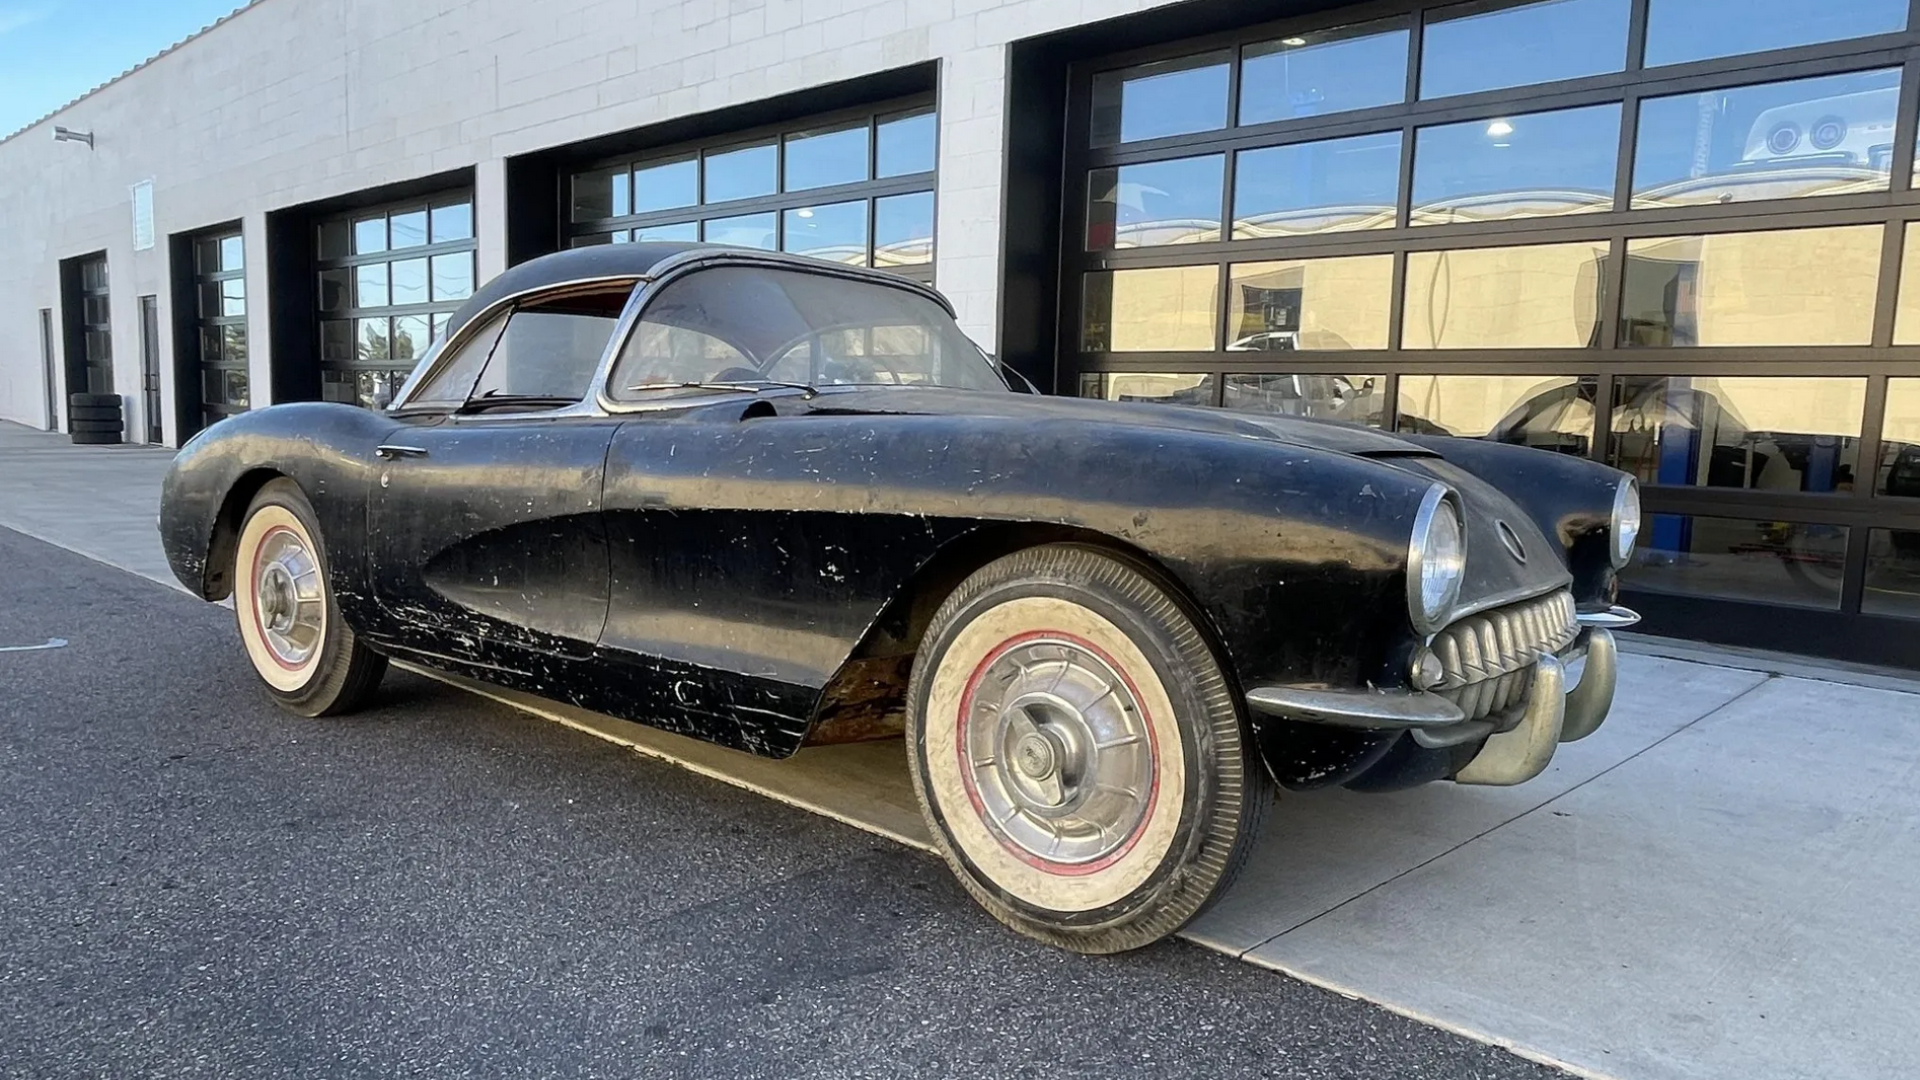 This One-Owner 1957 Chevy Corvette Rescued From Storage Needs a New Home